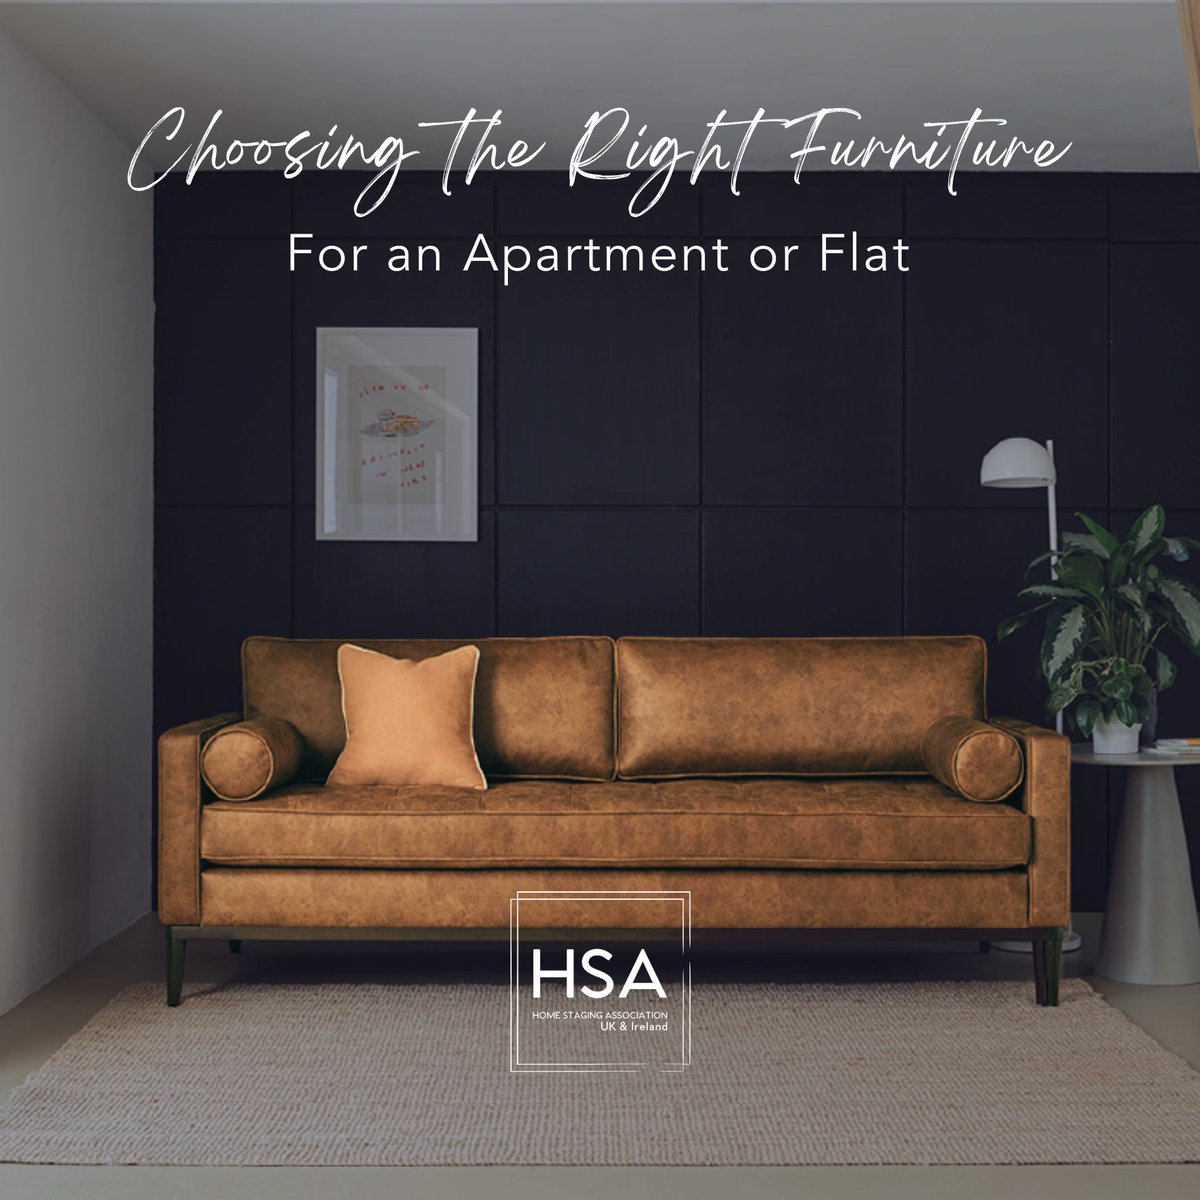 Discover the art of choosing the right furniture for a cosy, functional home with our expert tips. Visit our FB and IG pages to learn more!

@swyft_home 

#homestagingtips #furniture #swyfthome #homestagingbusiness #homestaginguk #homestagingireland #hsauk